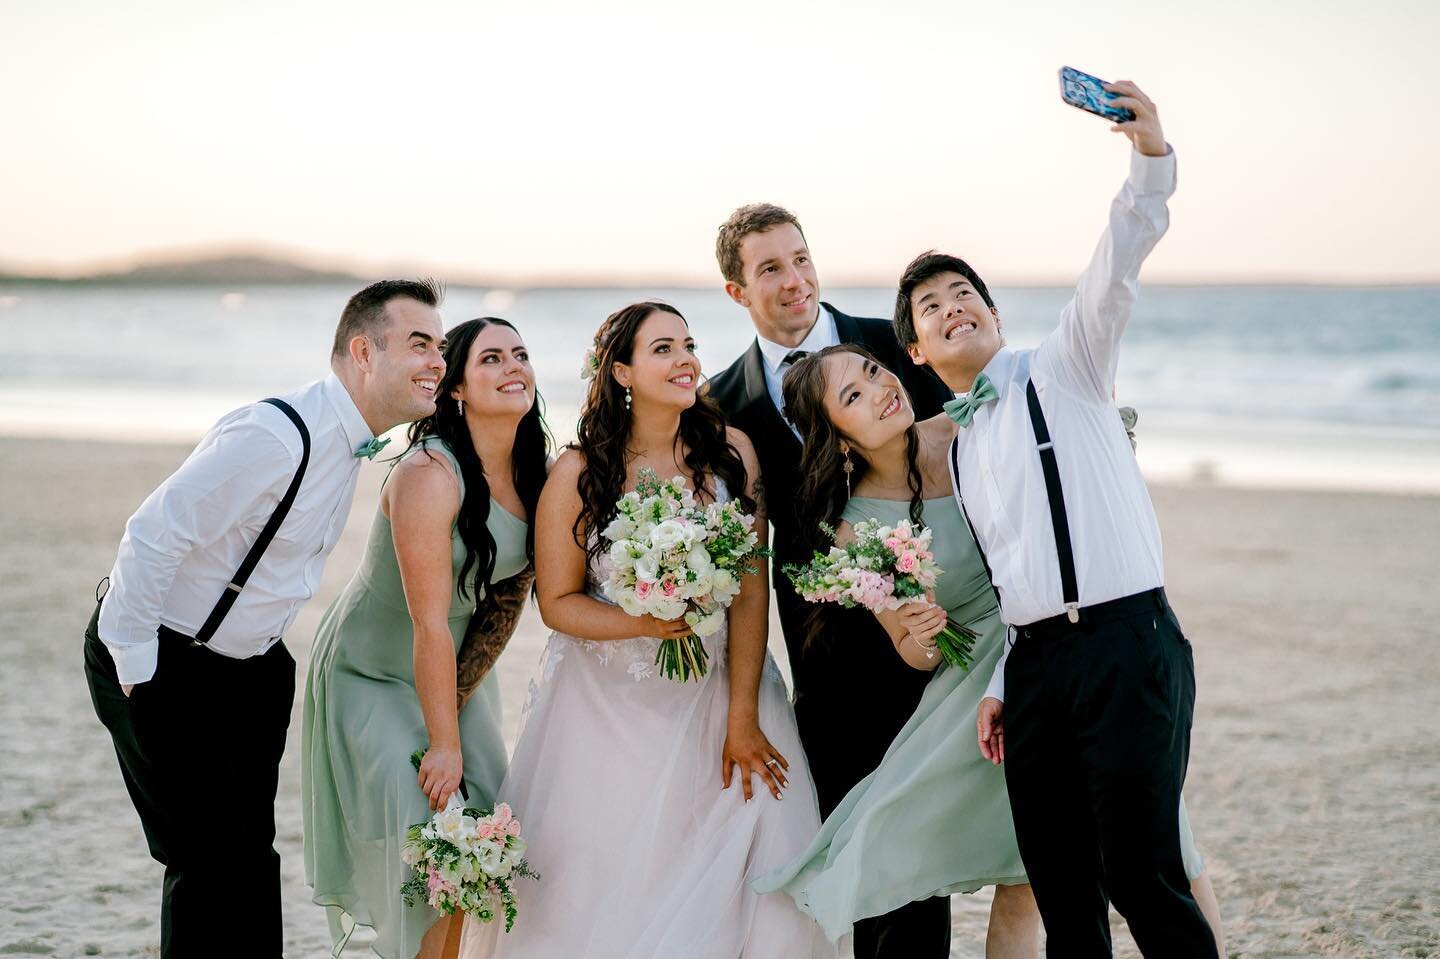 Bridal Party Selfies 📷 What an absolutely amazing afternoon with this gorgeous group.
Congratulations Rebecca and Ilia 🥂@lindy.photography @sunshineweddingsau @flax_flower_ @noosa.elopements @noosaweddings_